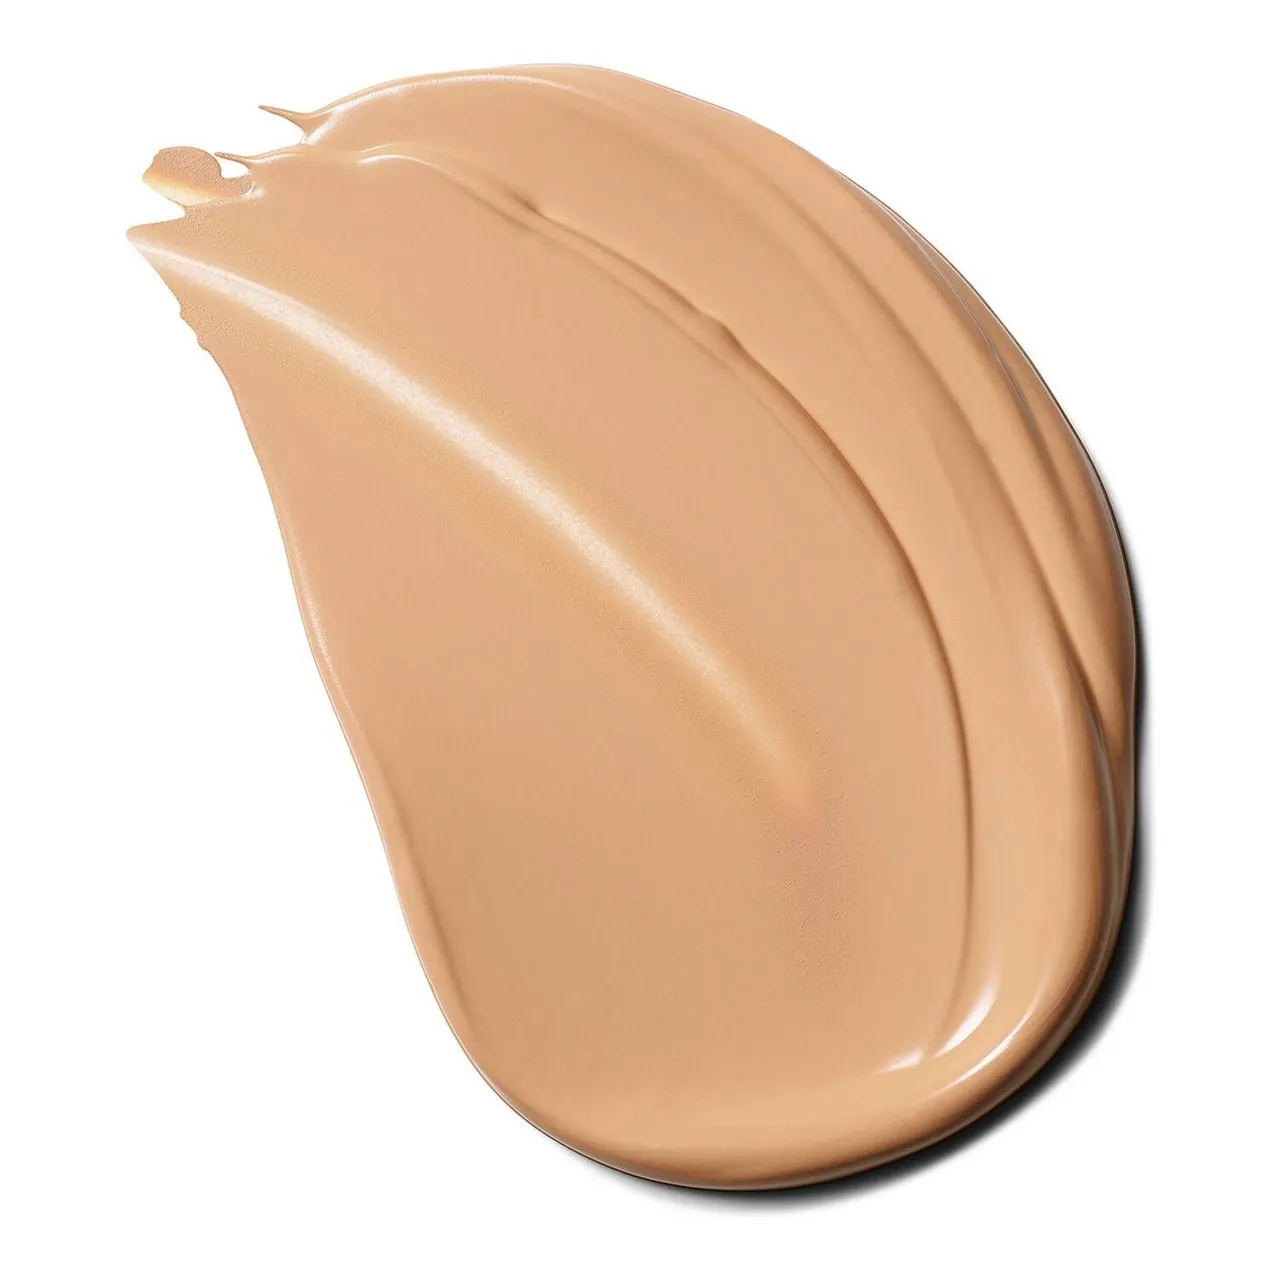 Estée Lauder Double Wear Maximium Cover Camouflage Foundation For Face And Body Spf 15 30Ml 2W1 Dawn